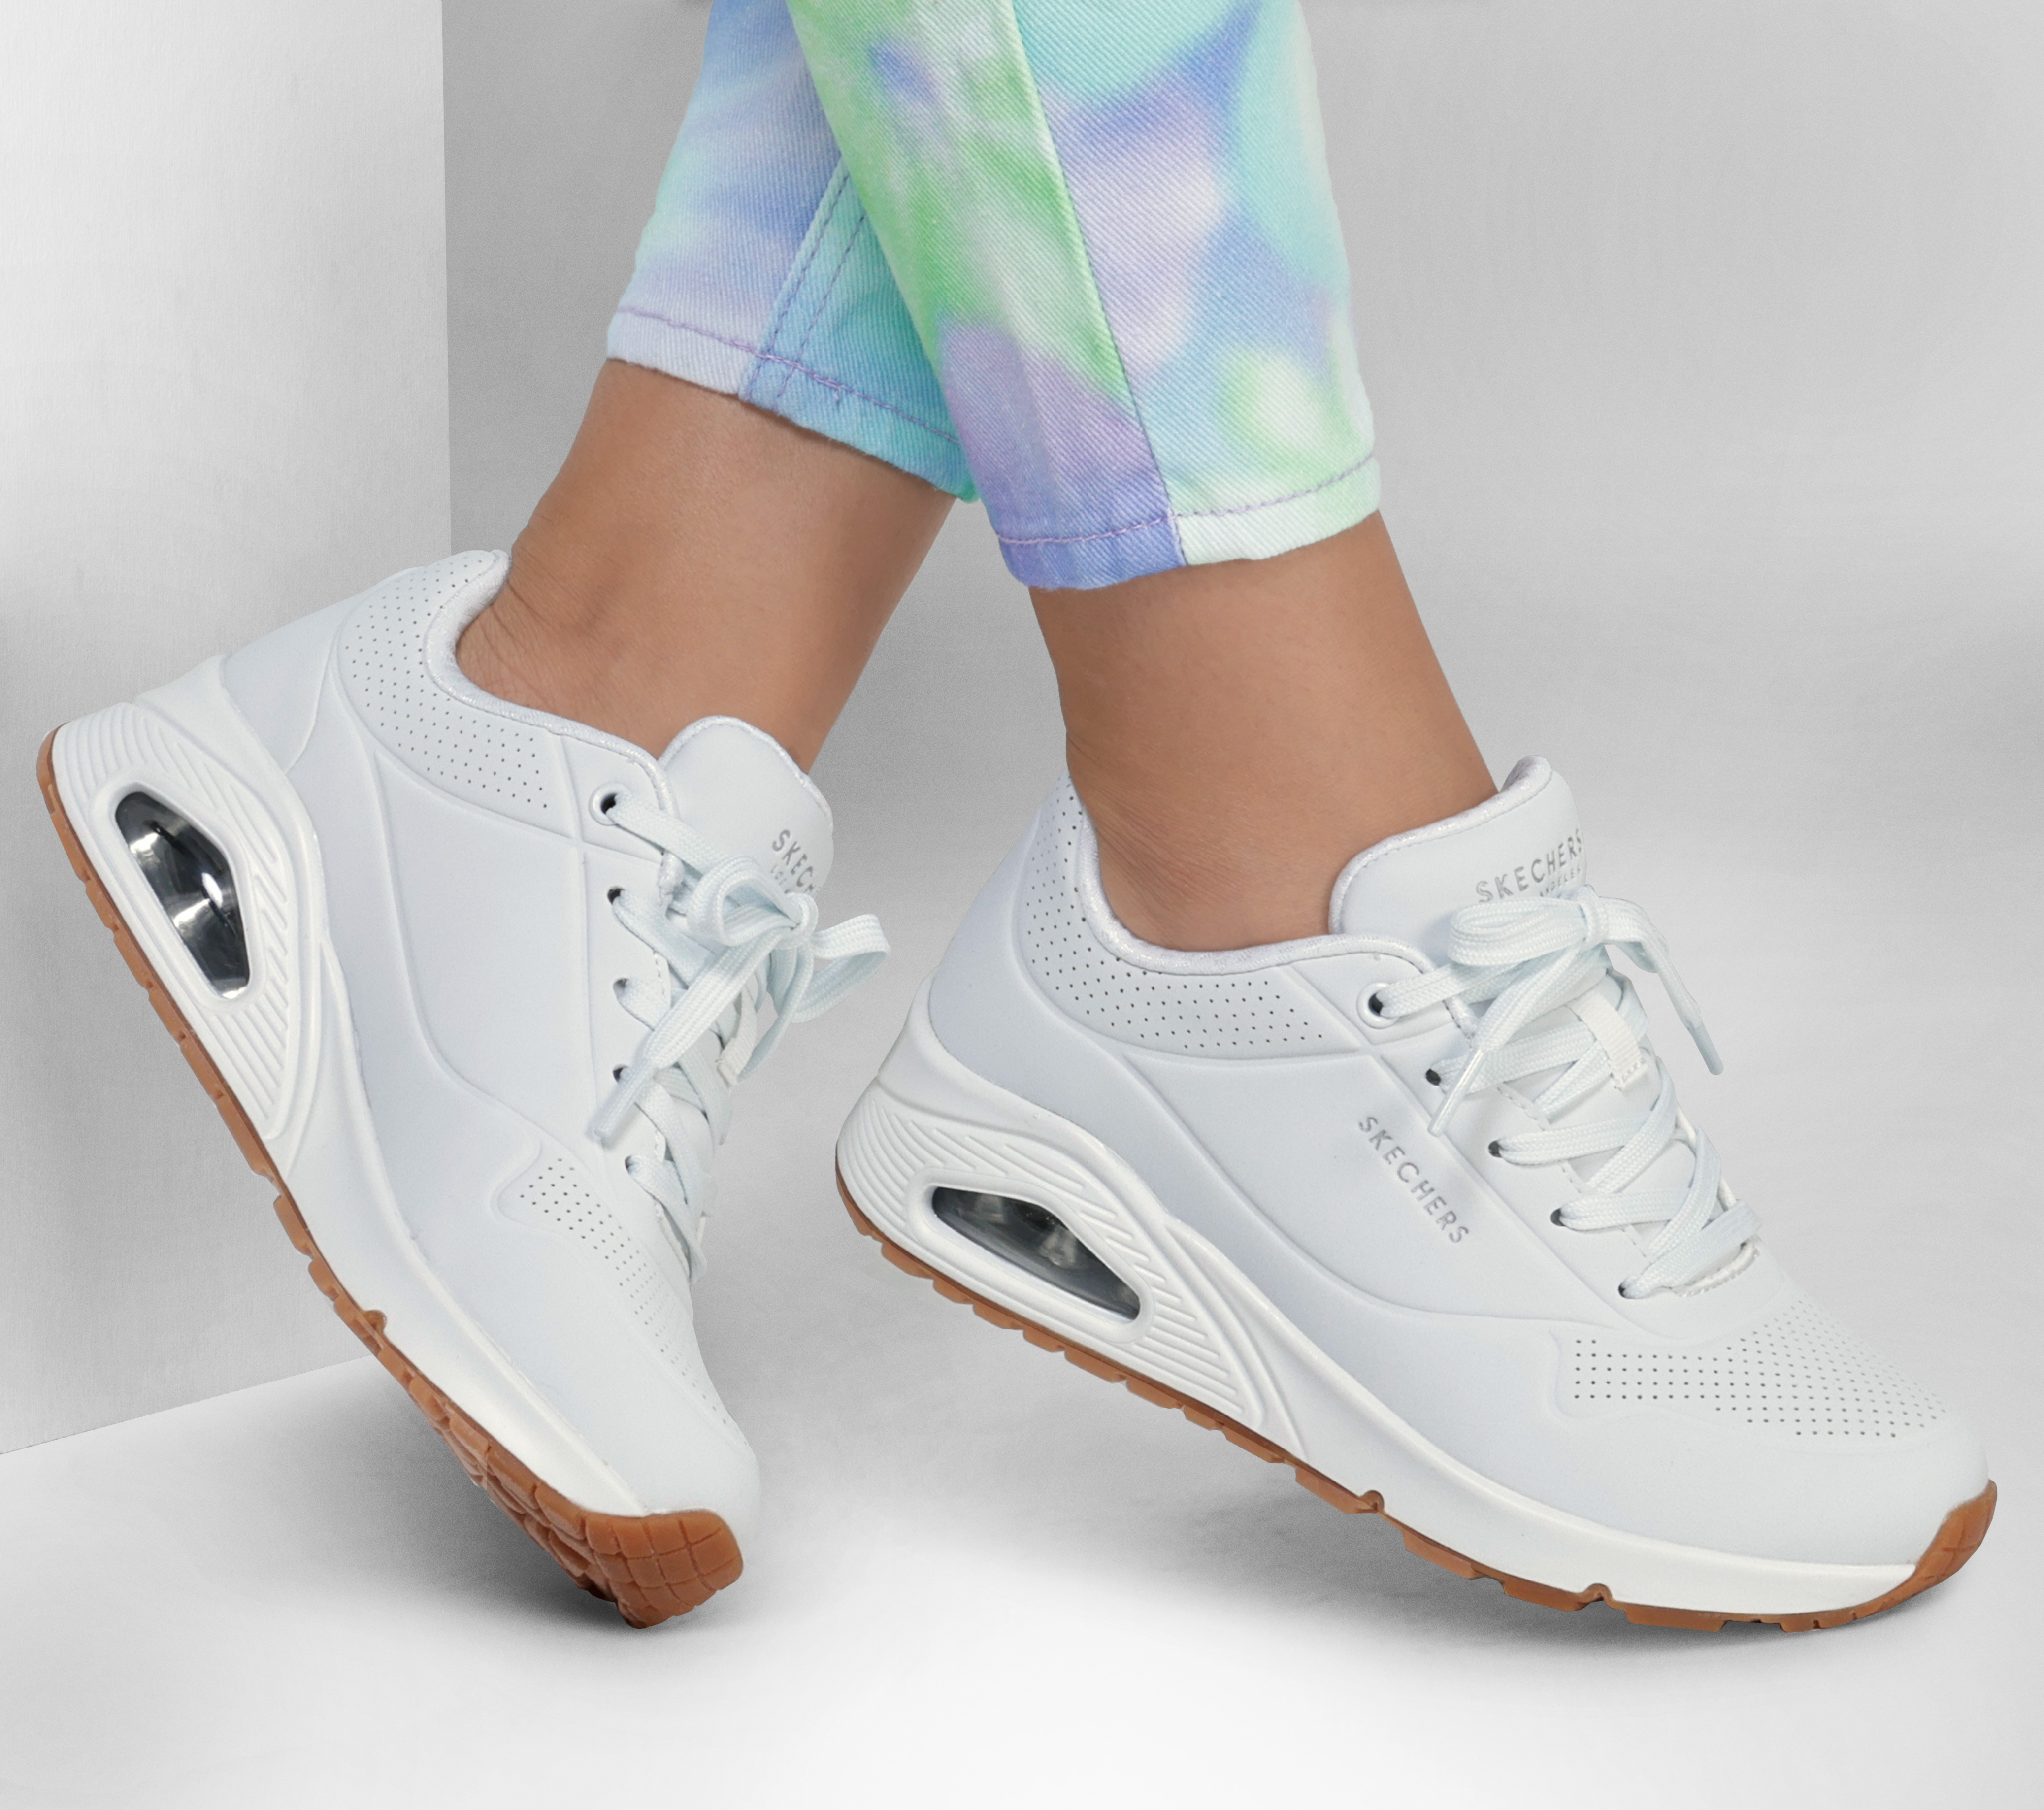 Shop the Uno - Stand on Air | SKECHERS